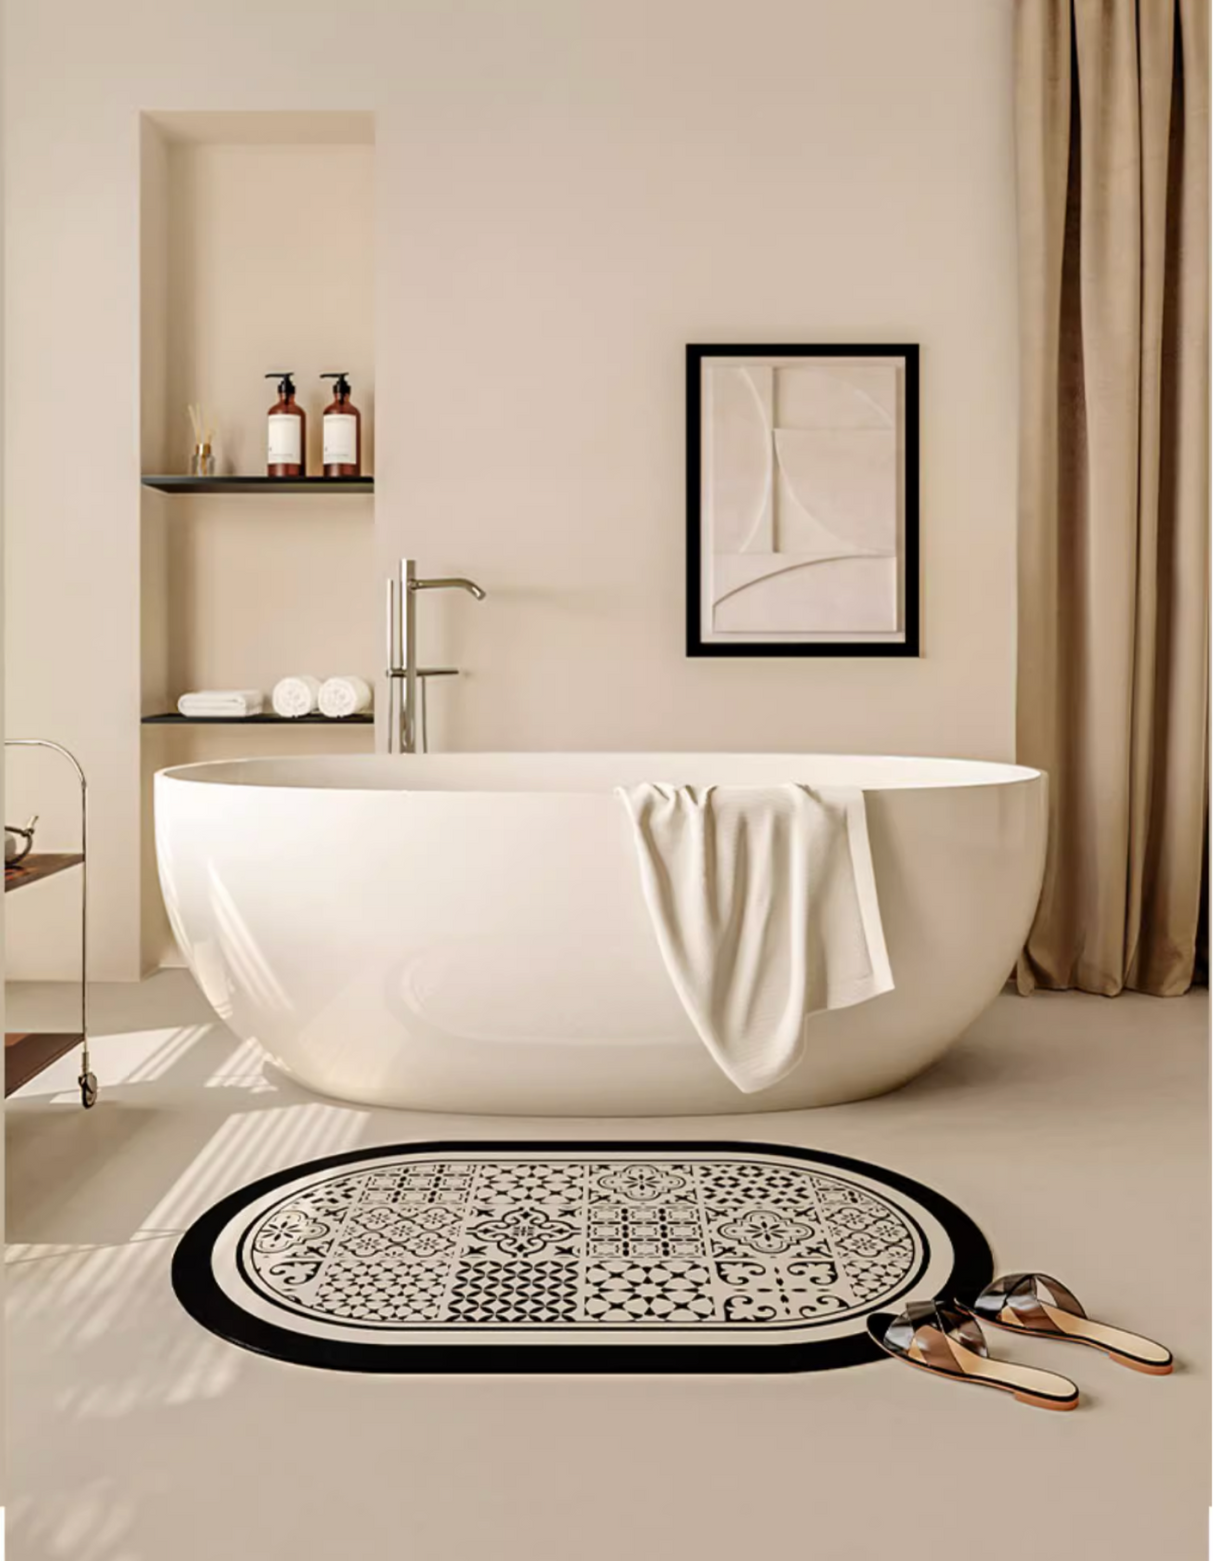 Introduce the stylish UnRoll Classic Patchwork Bath Mat. Transform your bathroom routine with an ultra-absorbent, fast-drying, anti-bacterial and elegant bathroom mat. 